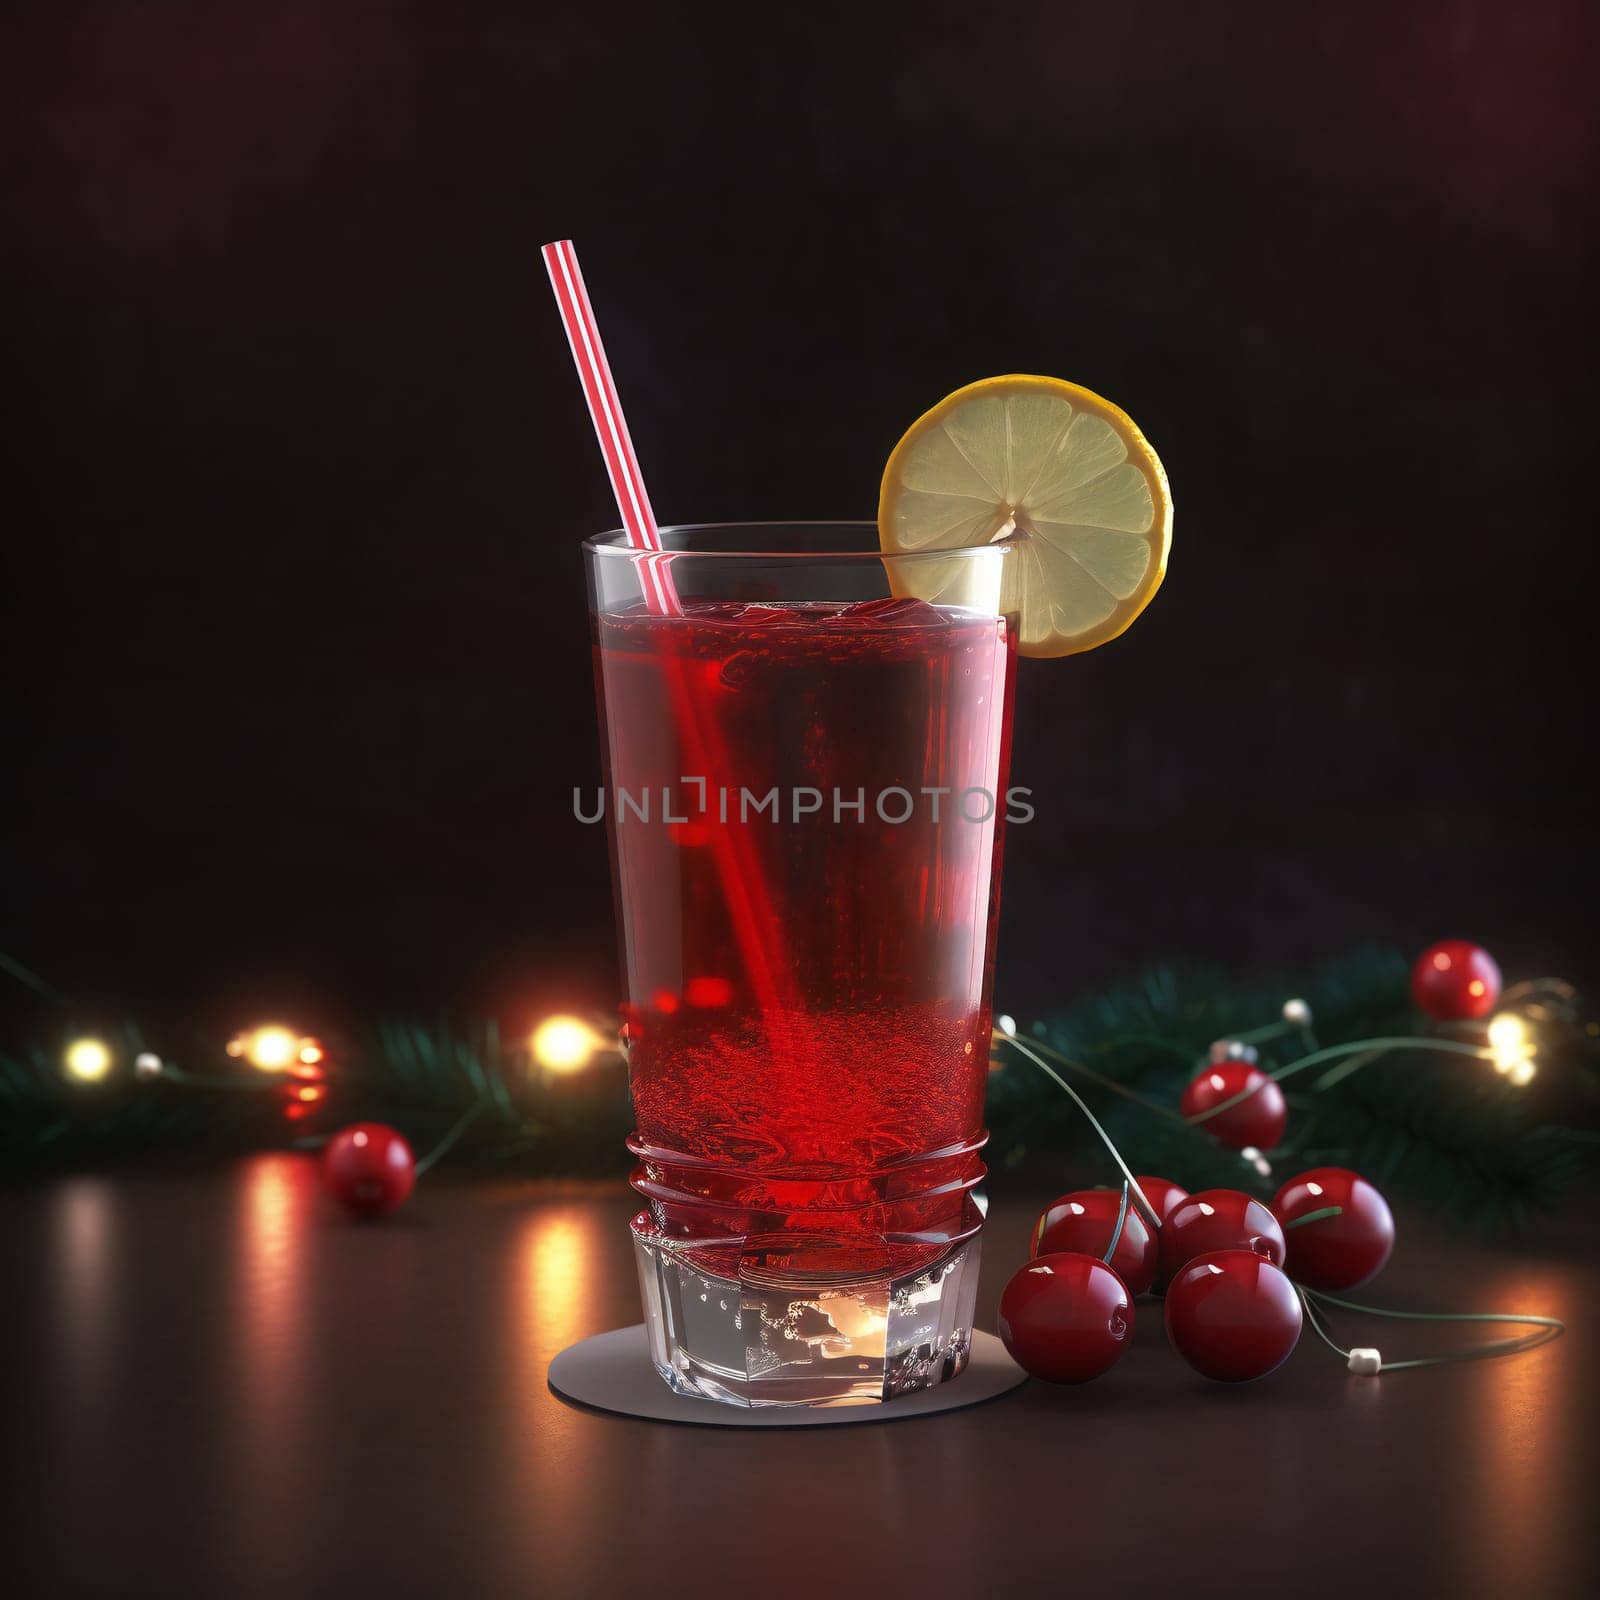 Refreshing drink with cranberries and lemon on dark stone background. Christmas cocktail.